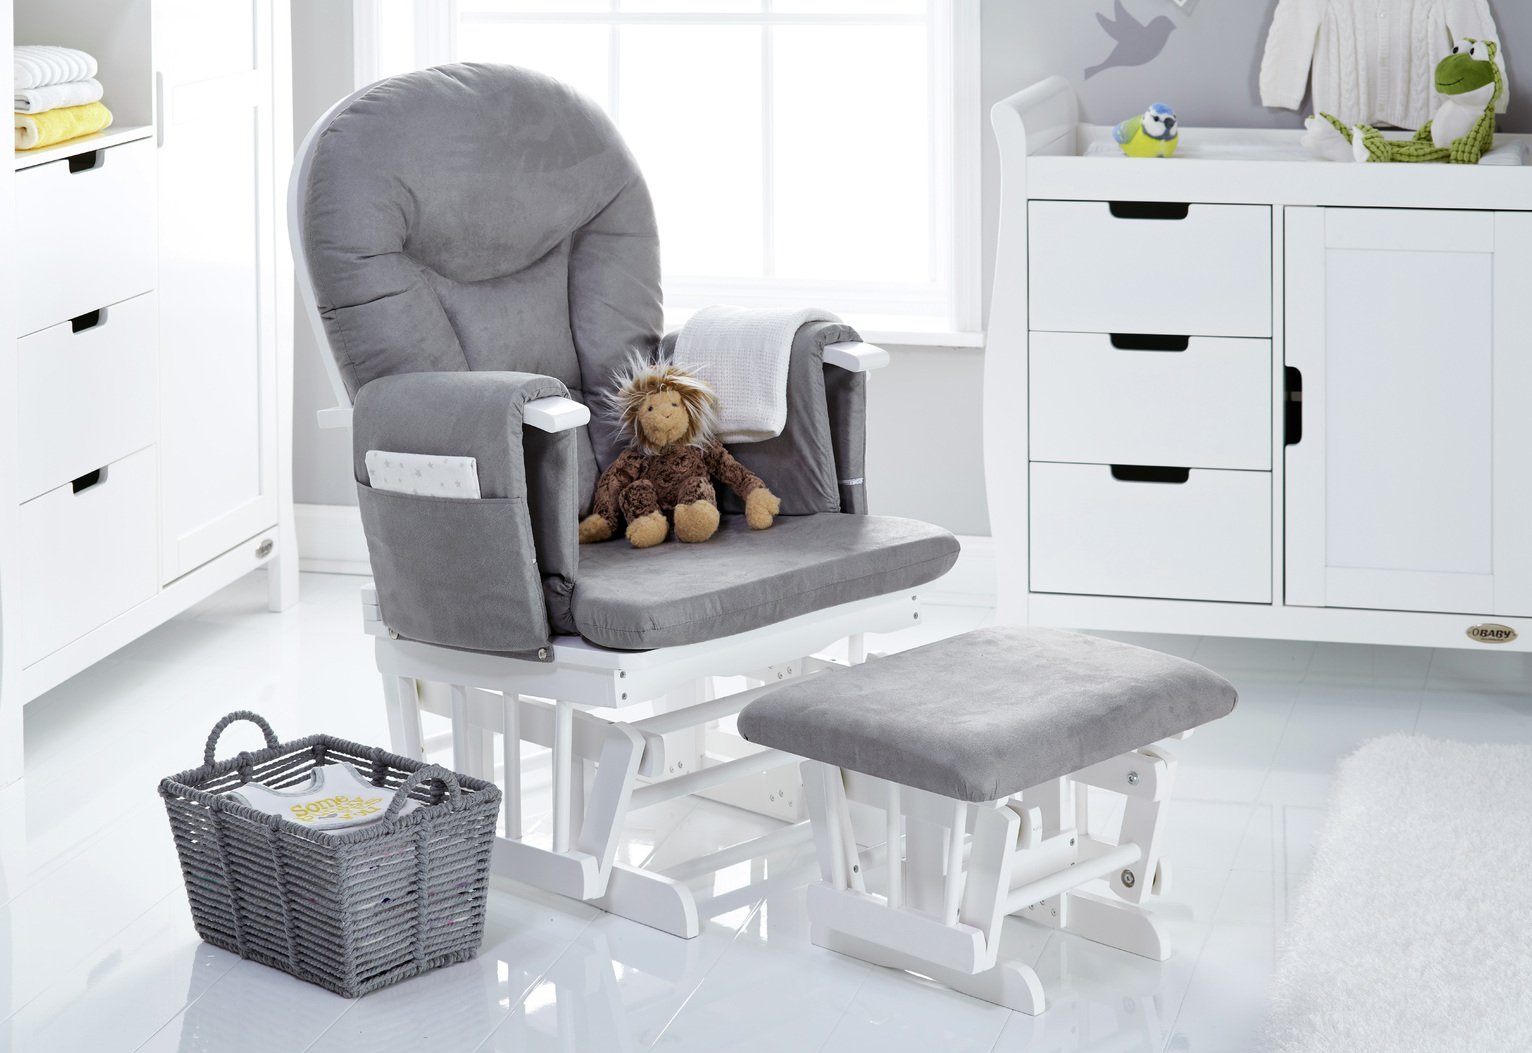 grey and white nursing chair